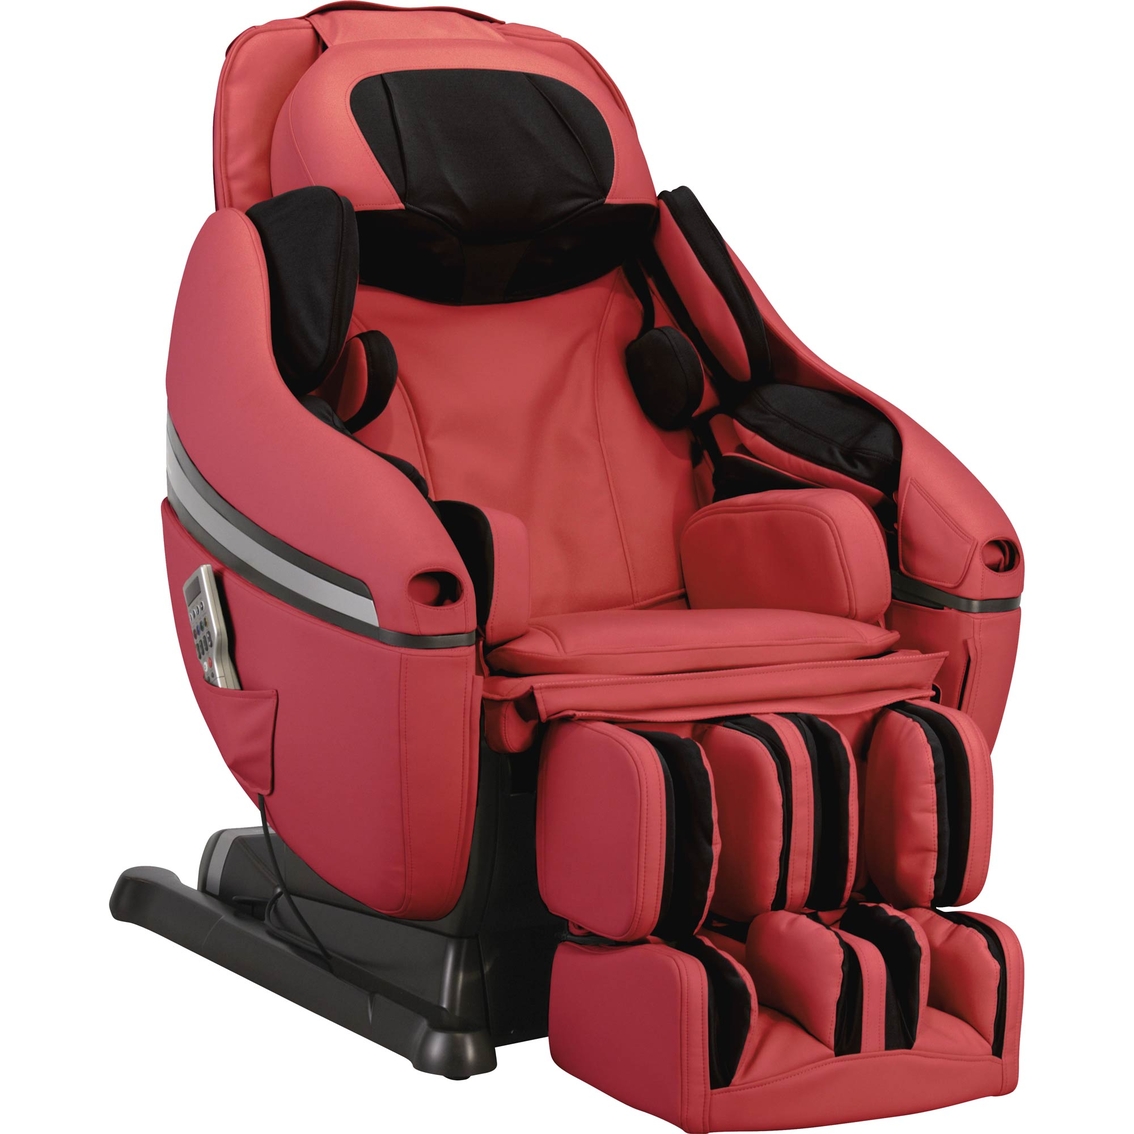 Inada Dreamwave Massage Chair, Red | Chairs & Recliners | Furniture